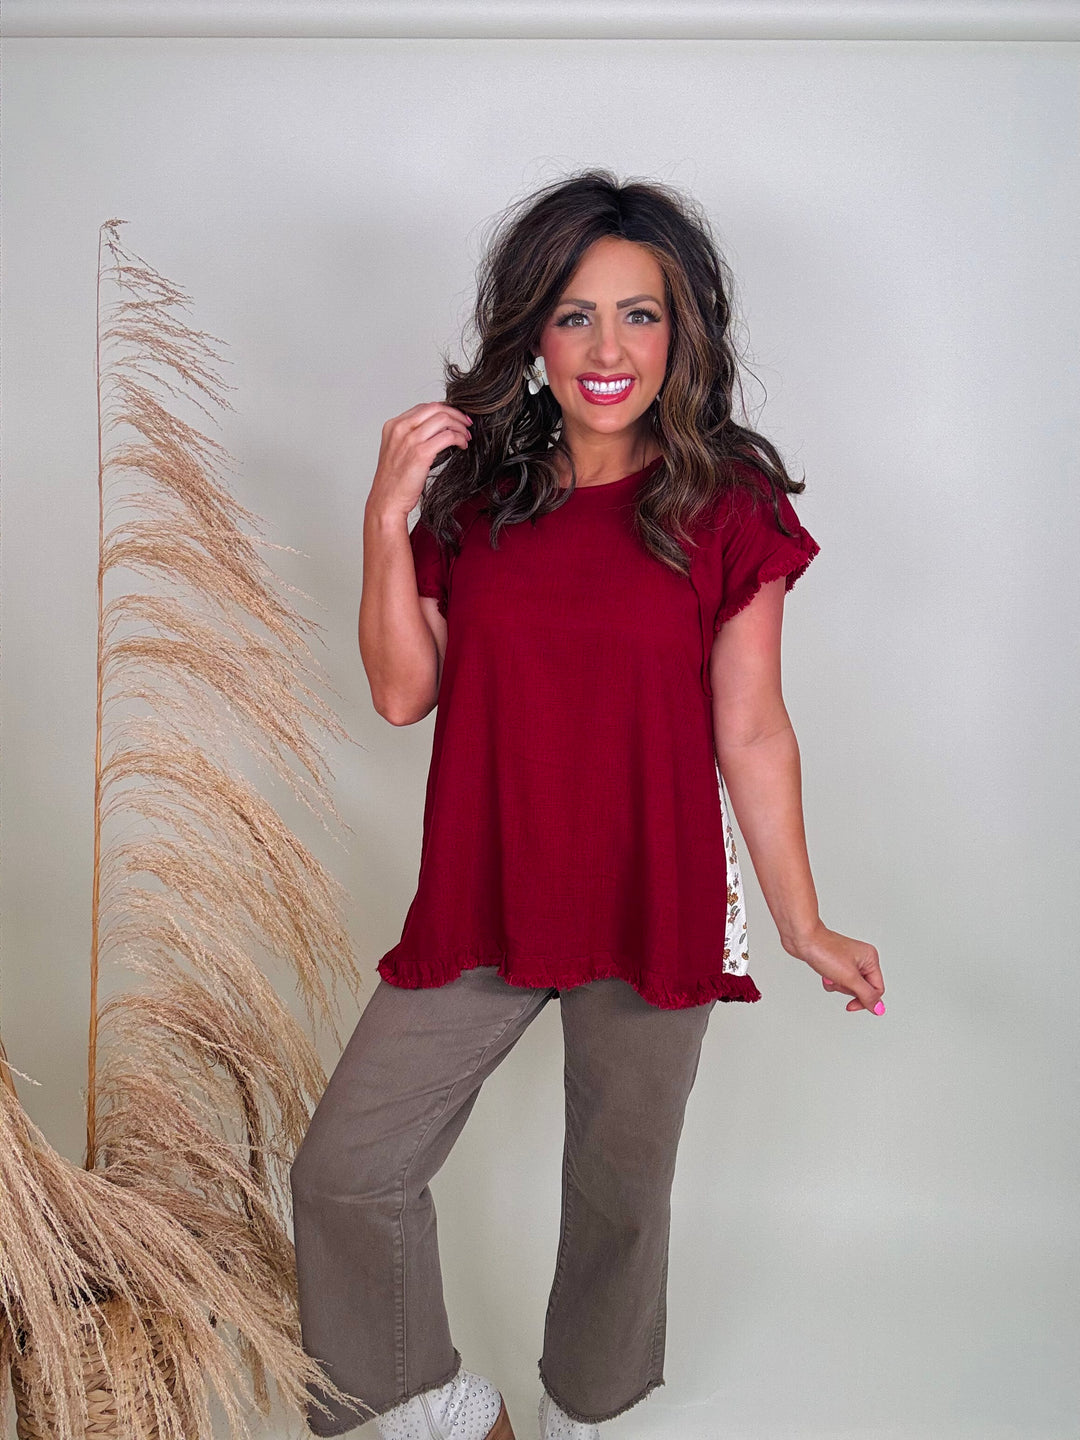 Linen Blend Scoop Neck Shirt, Frayed Hem & Mixed Print Back - 2 Color Options - Available Small Through Extended Sizes